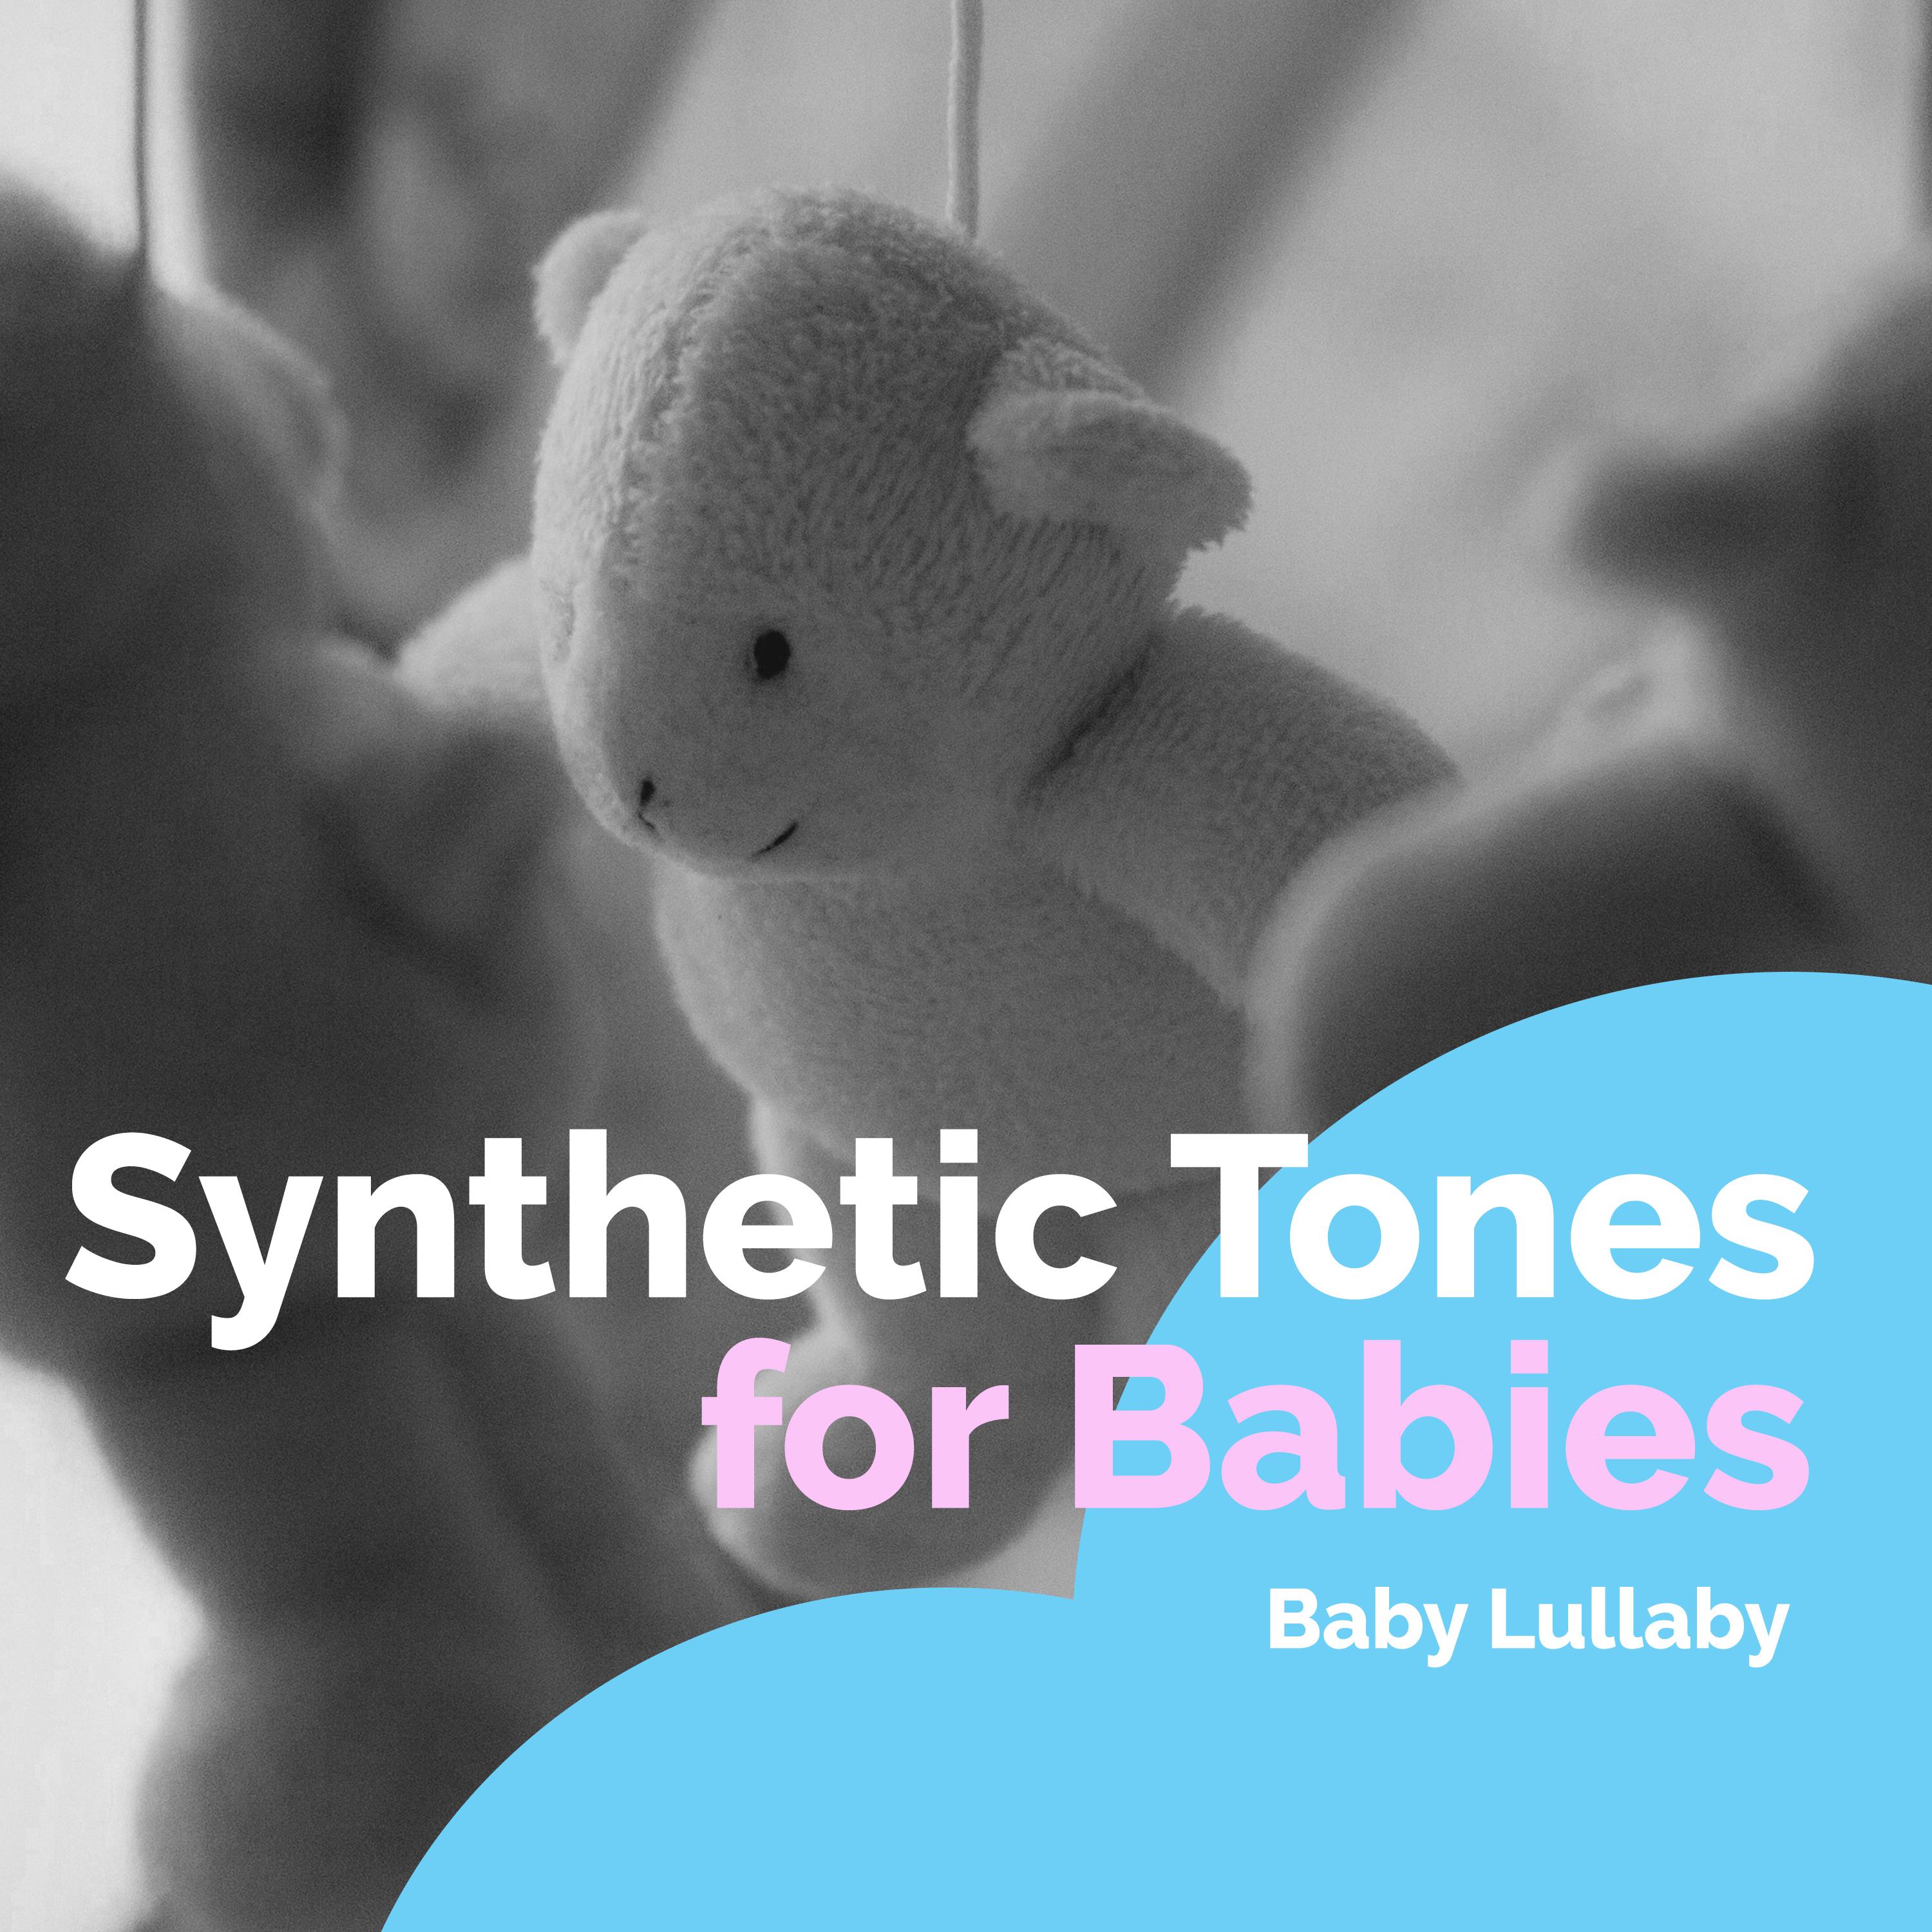 Synthetic Tones for Babies